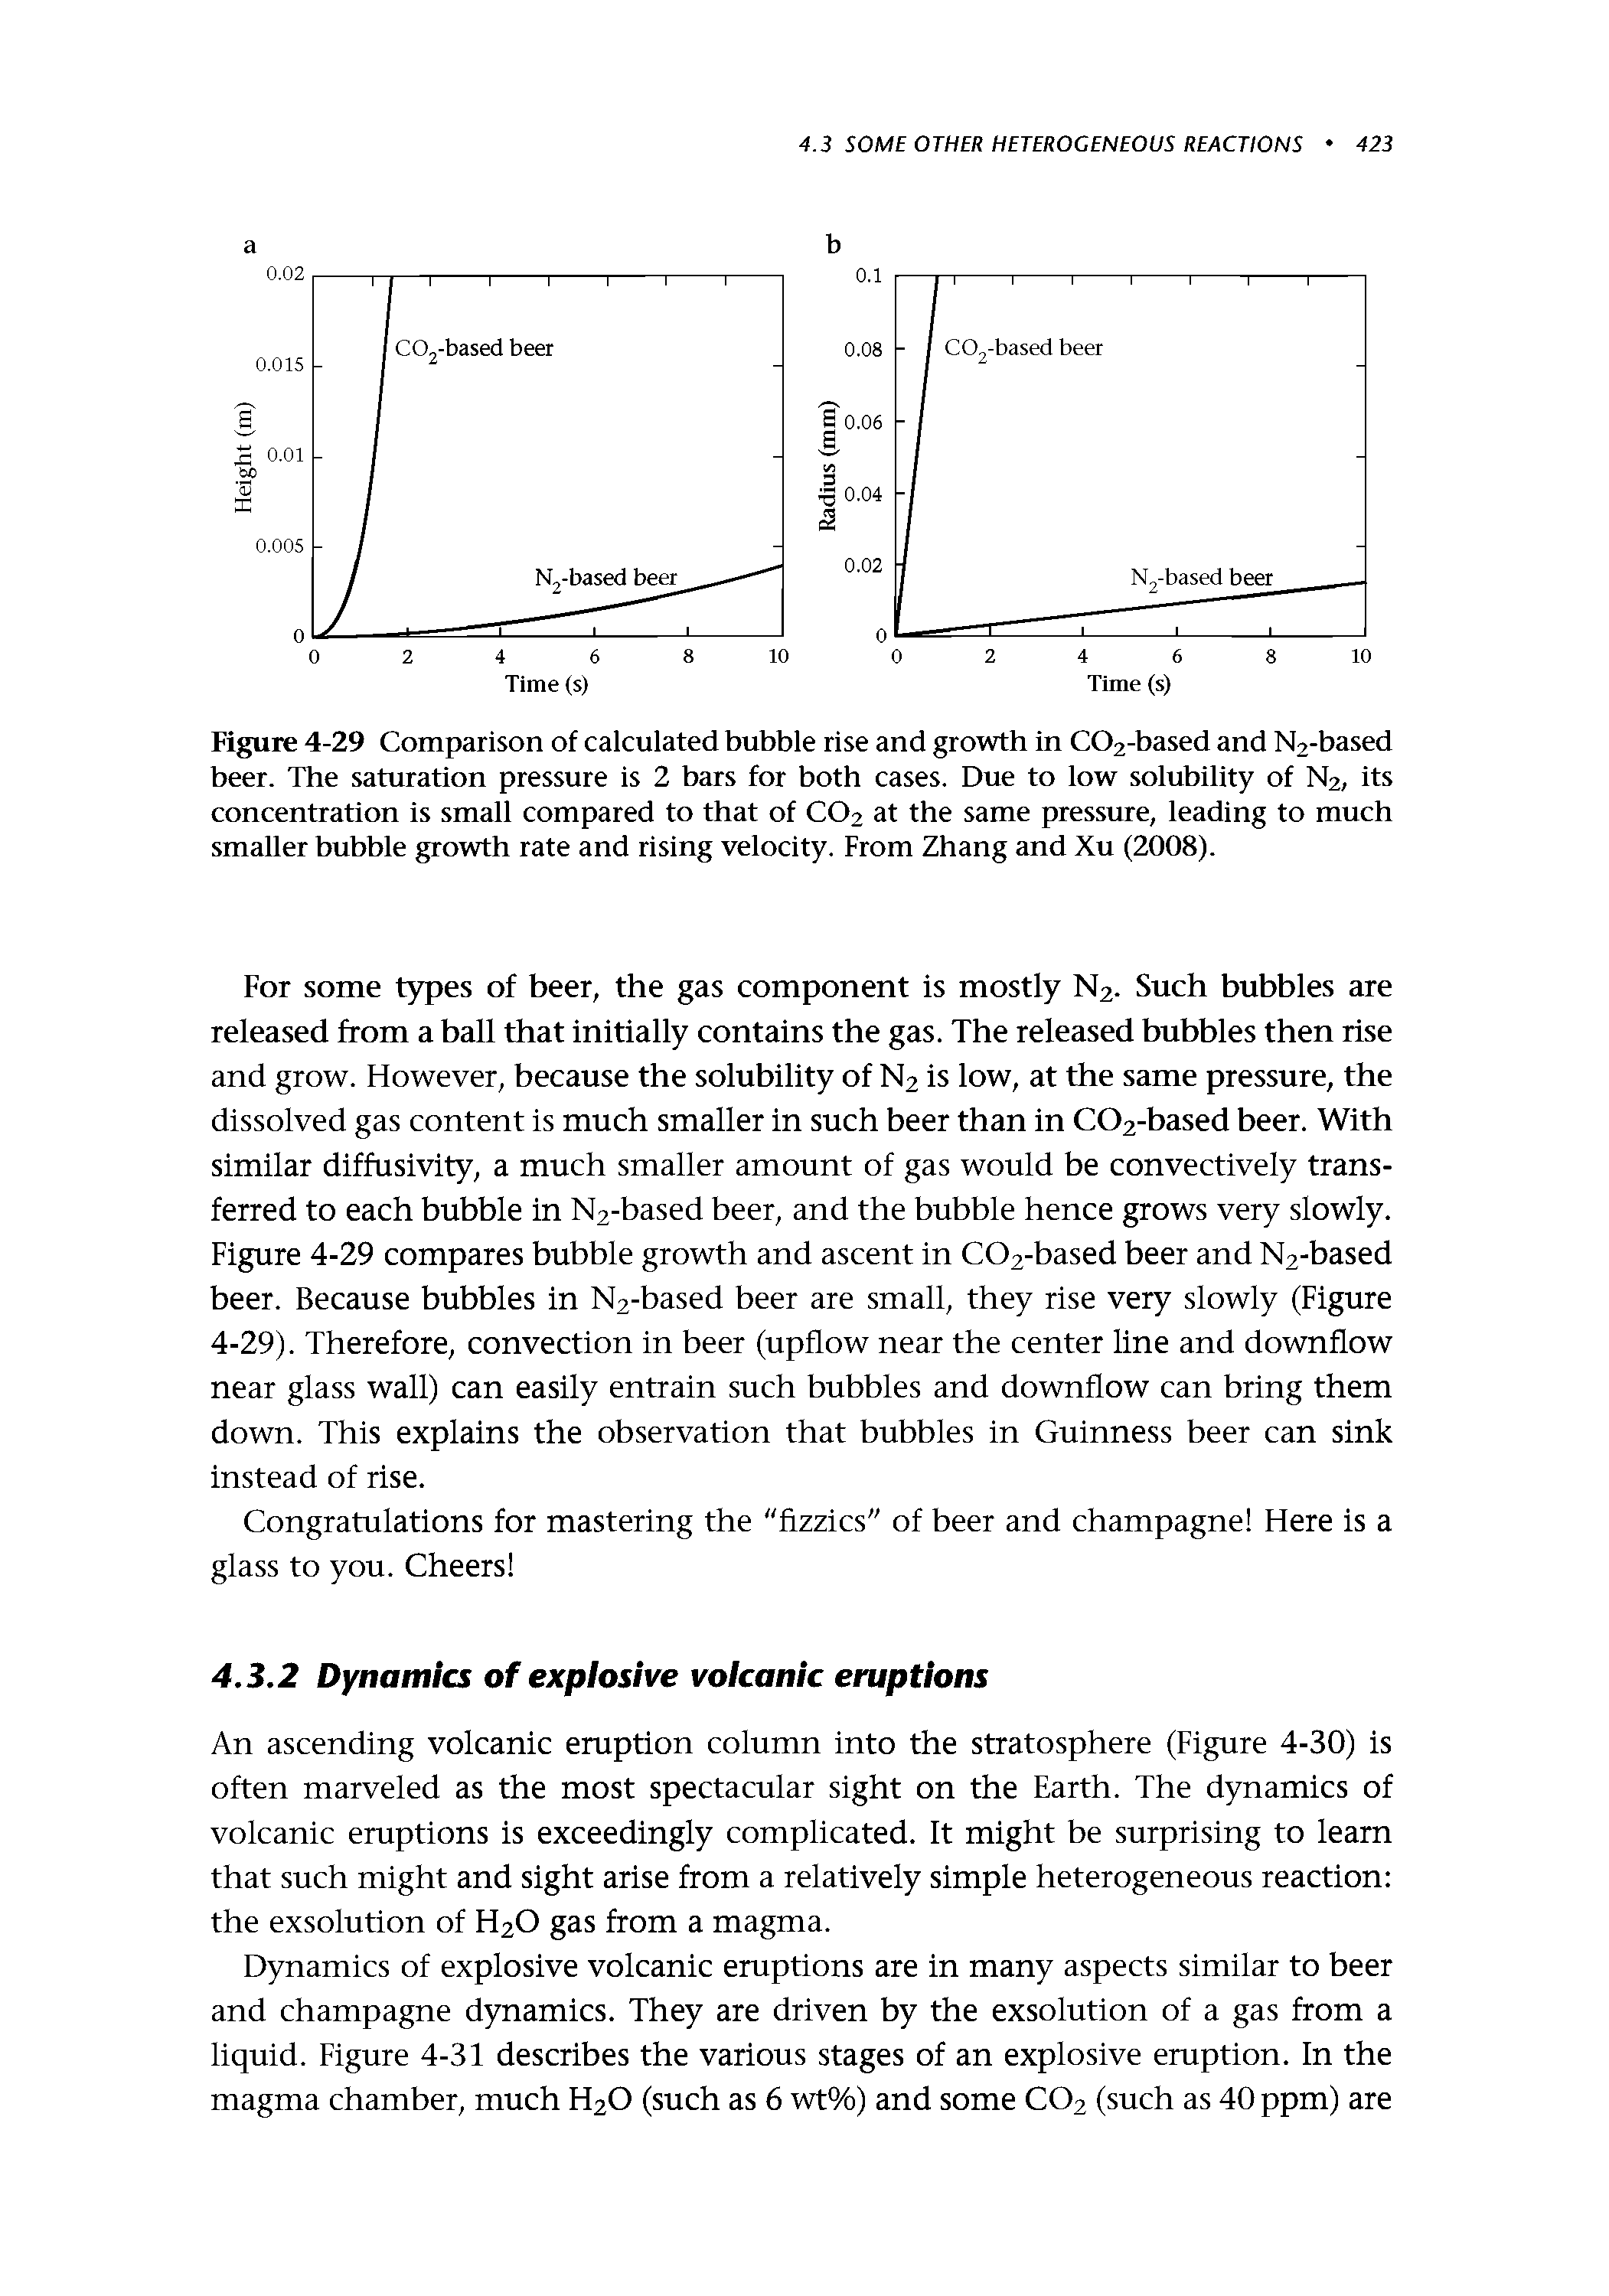 Figure 4-29 Comparison of calculated bubble rise and growth in C02-based and N2-based beer. The saturation pressure is 2 bars for both cases. Due to low solubility of N2, its concentration is small compared to that of CO2 at the same pressure, leading to much smaller bubble growth rate and rising velocity. From Zhang and Xu (2008).